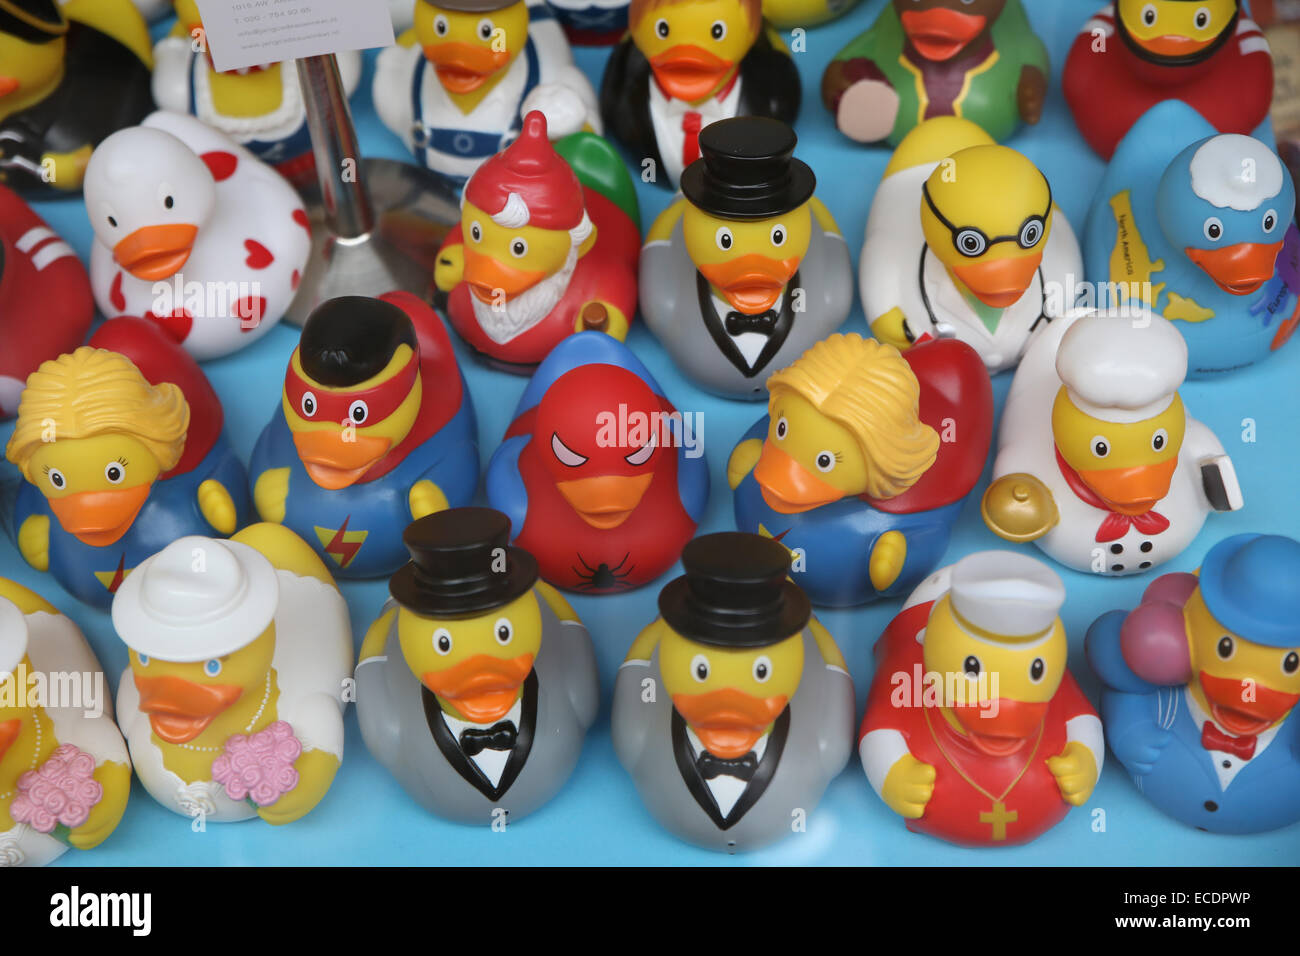 rubber duck toys Stock Photo